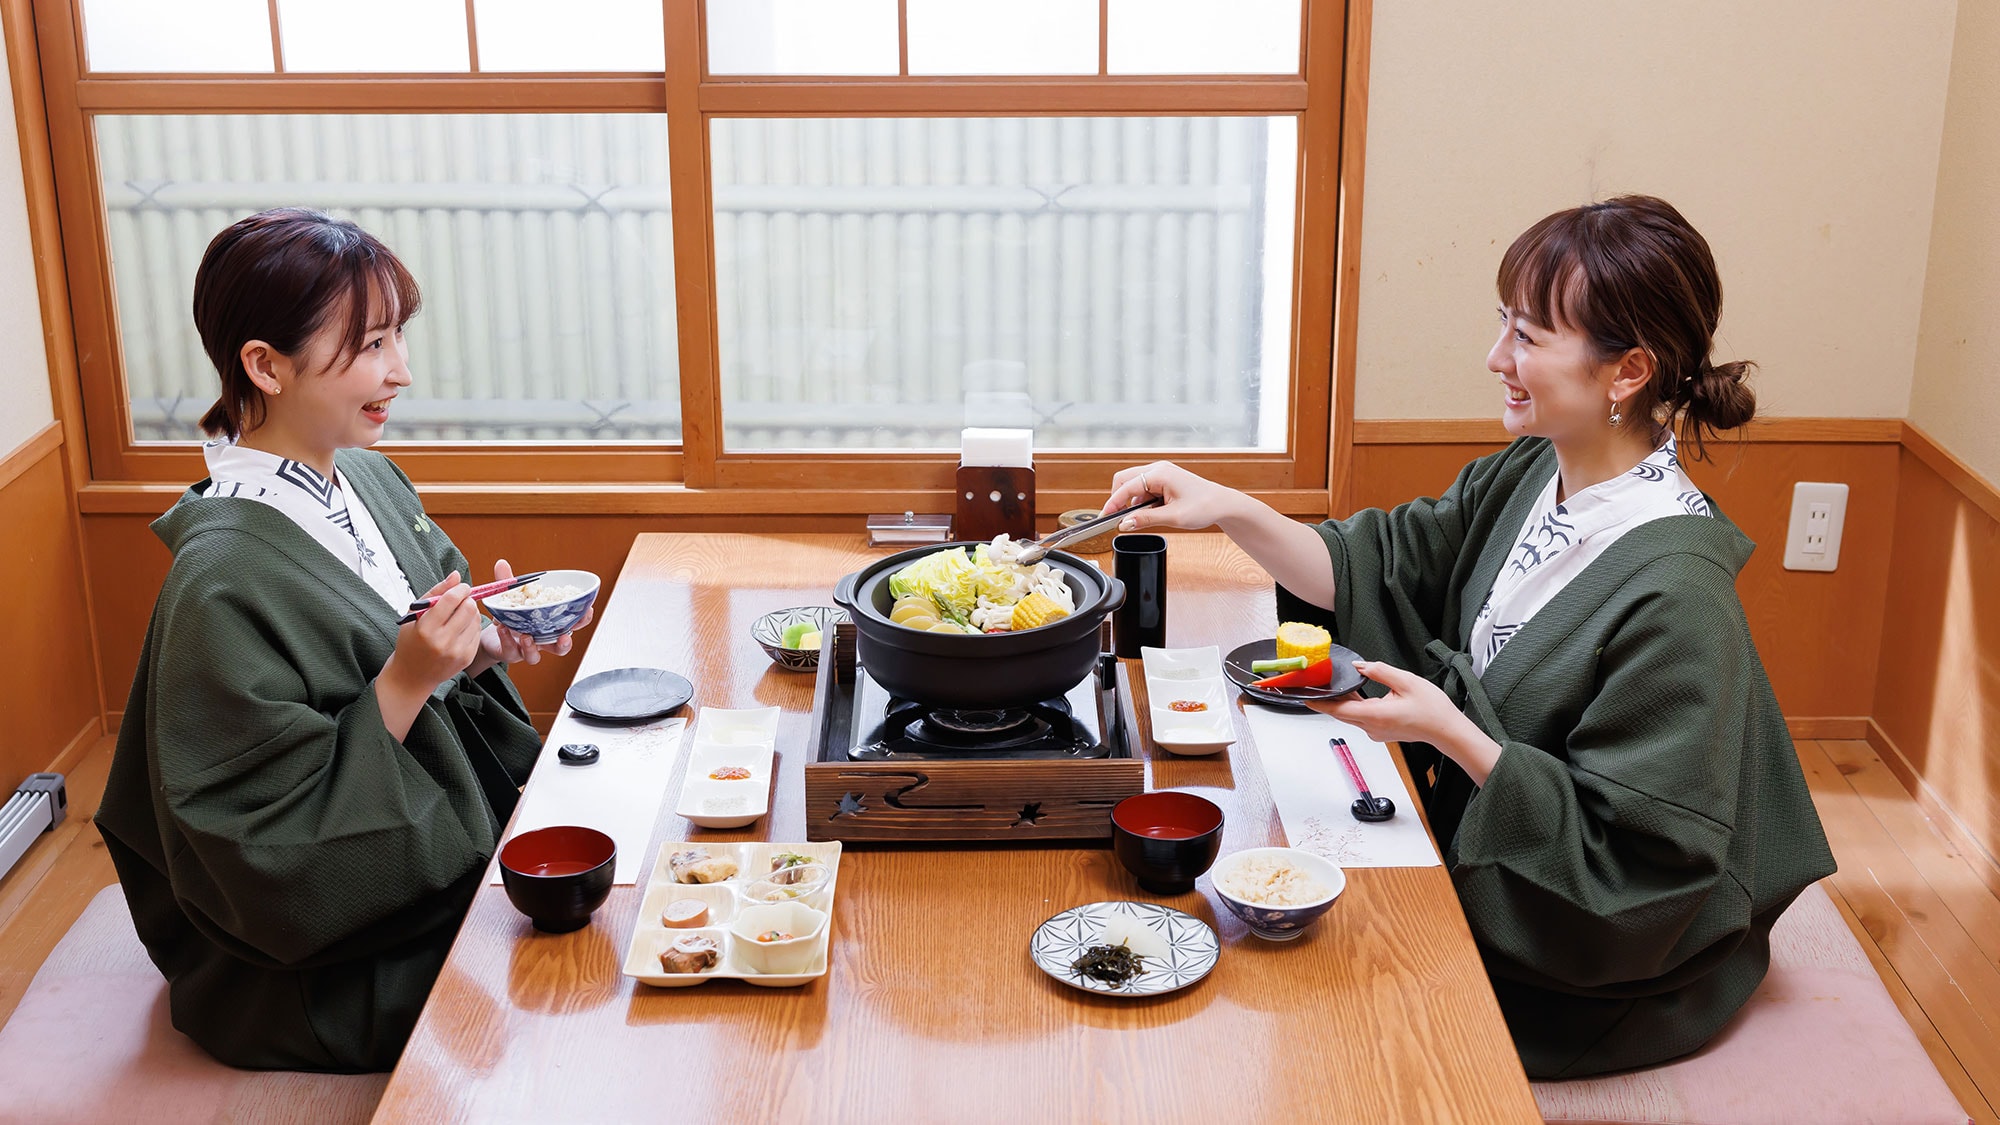 [Sakurabo] Enjoy your meal in a relaxed atmosphere in a semi-private room.